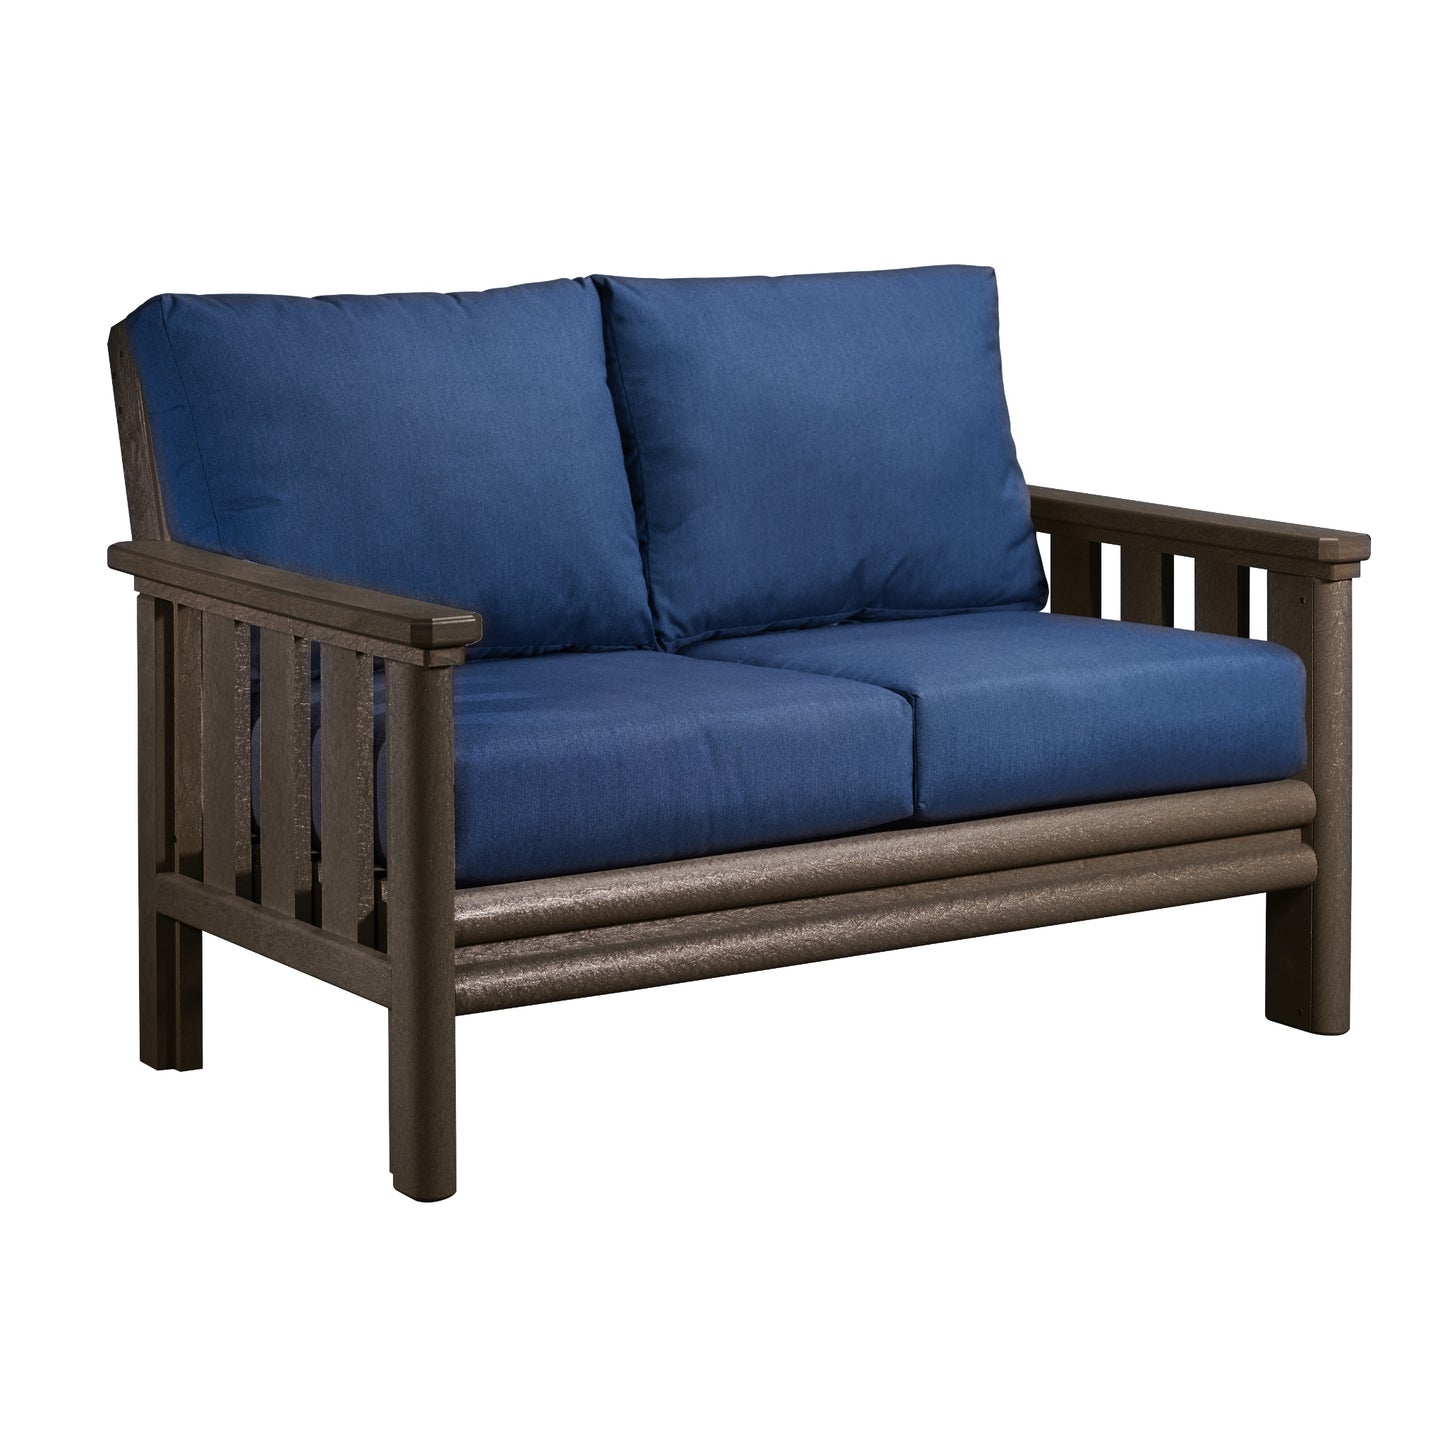 Stratford Loveseat CHOCOLATE FRAME WITH CUSHIONS - DSF262